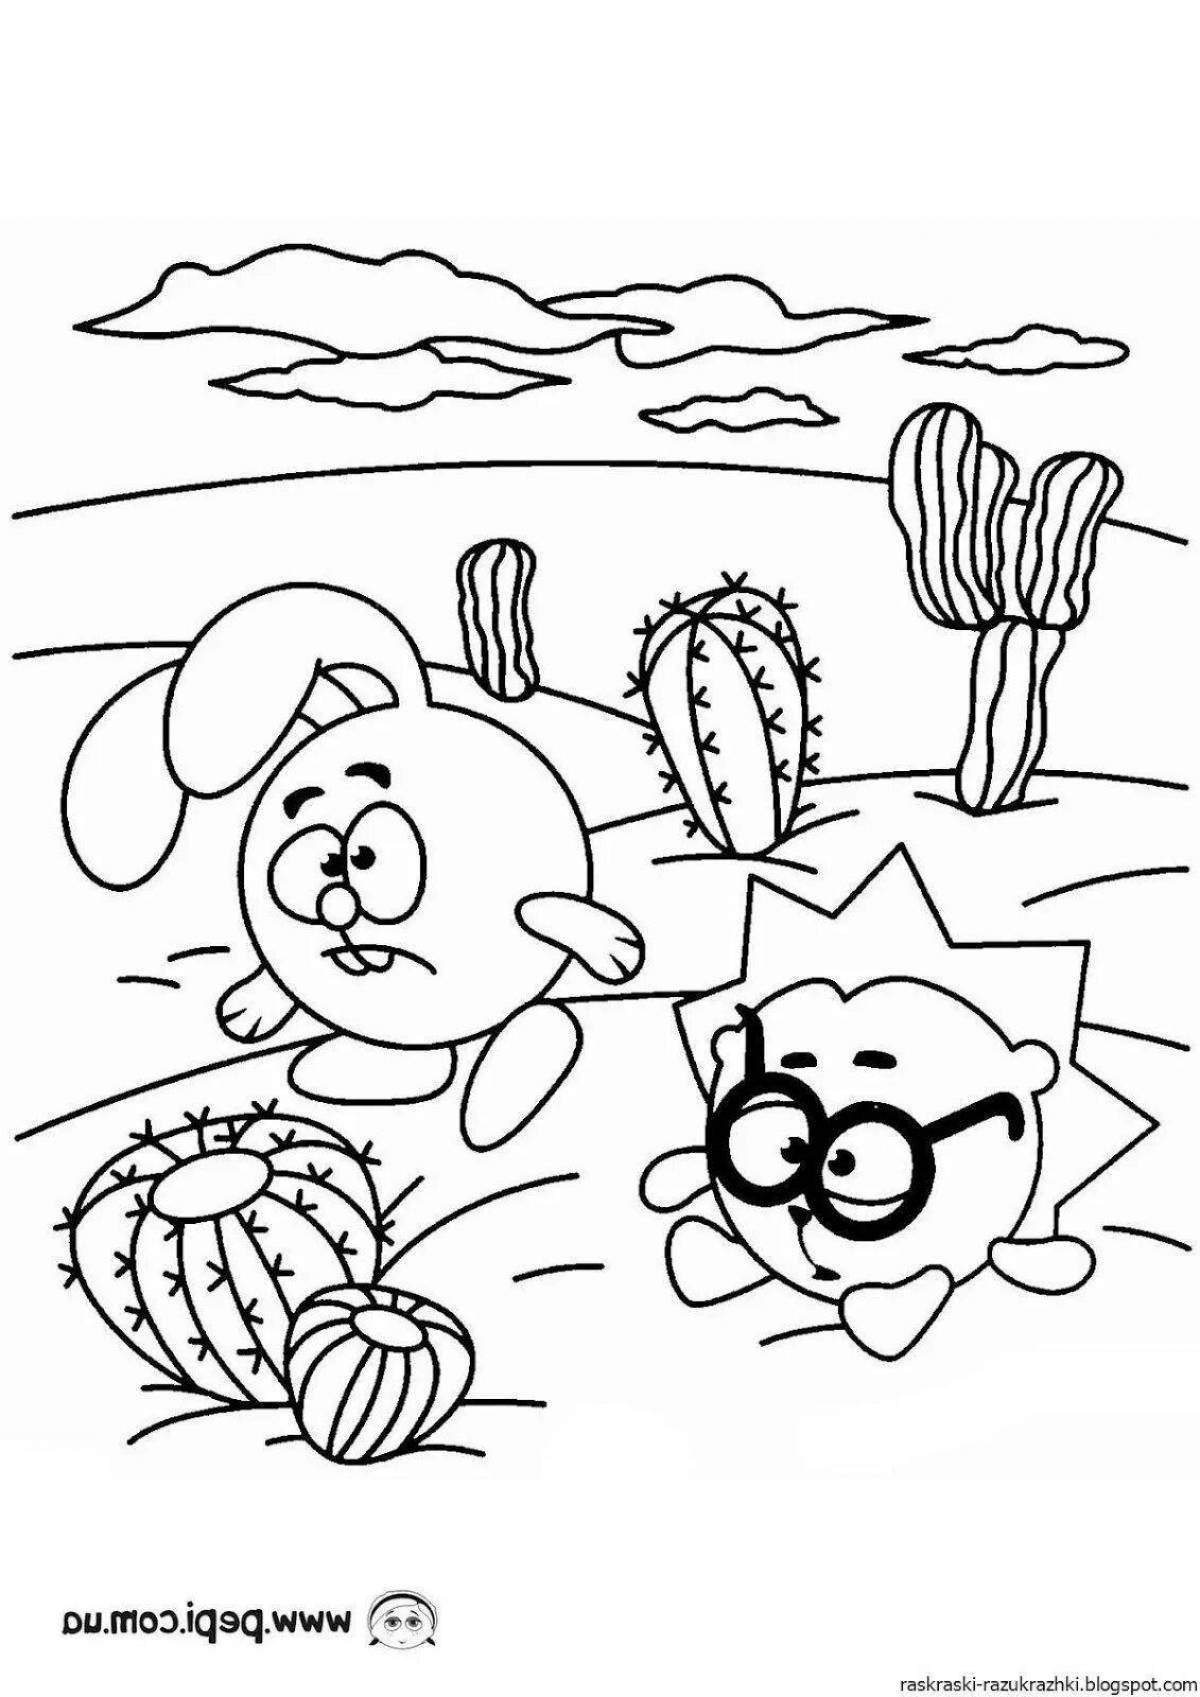 Printable coloring pages for kids